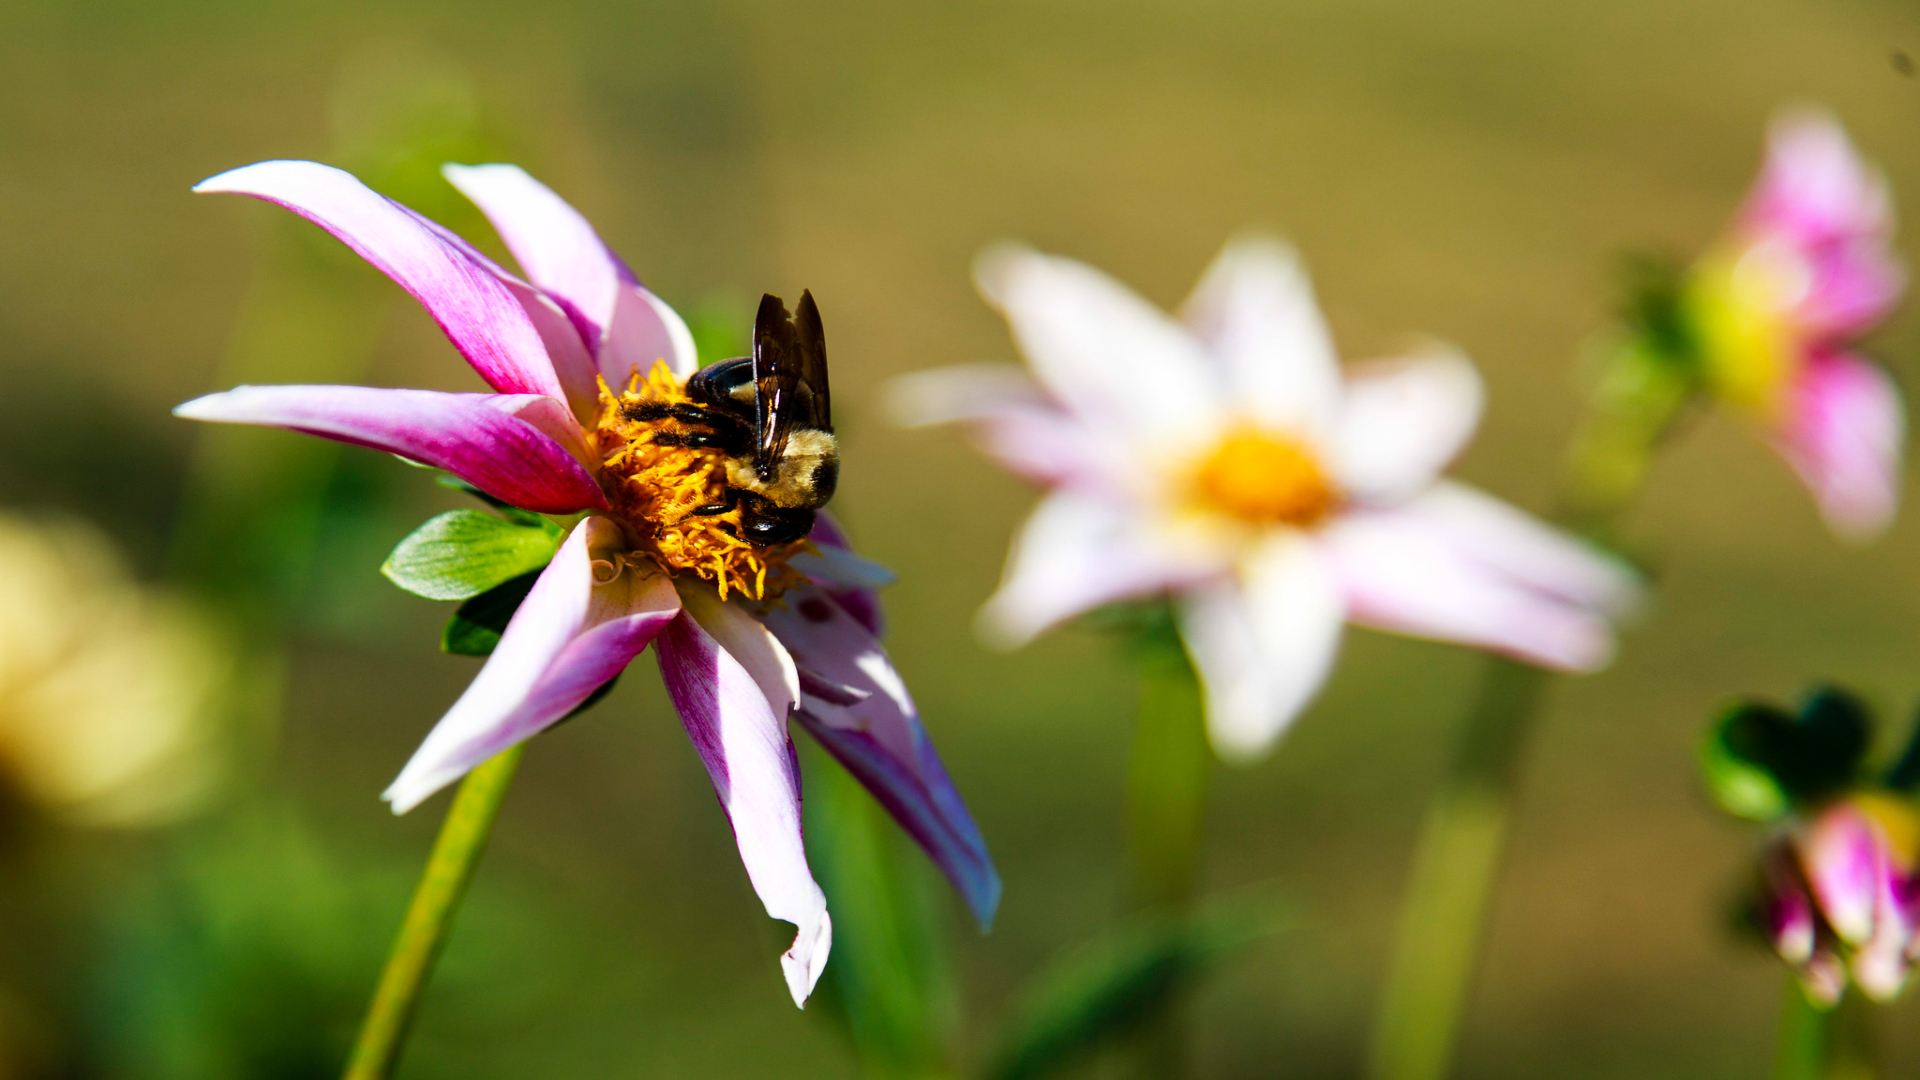 A bumble bee collects nectar and pollen from a dahlia in bloom.